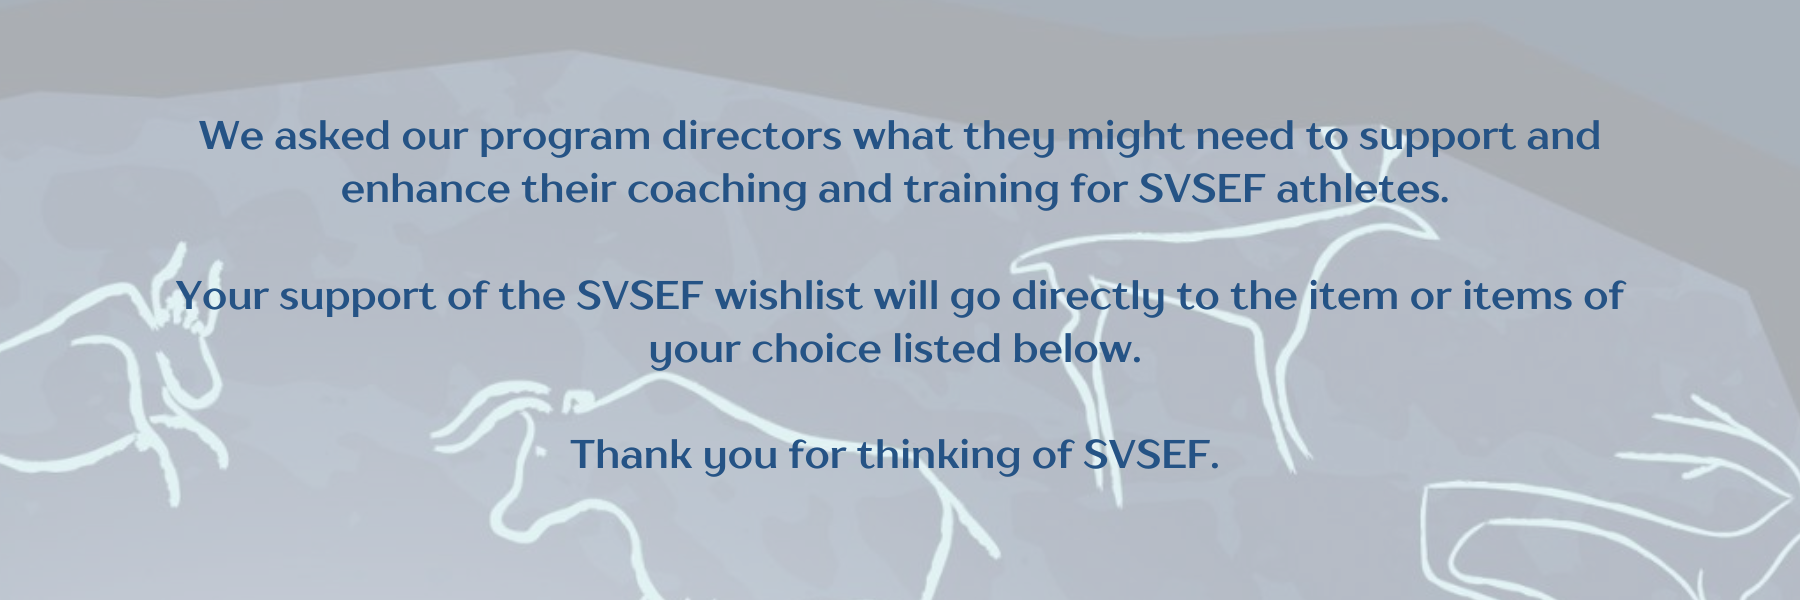 We asked our program directors what they might need to support and enhance their coaching and training for SVSEF athletes. Your support of the SVSEF wishlist will go directly to the item or items of your choice liste.png